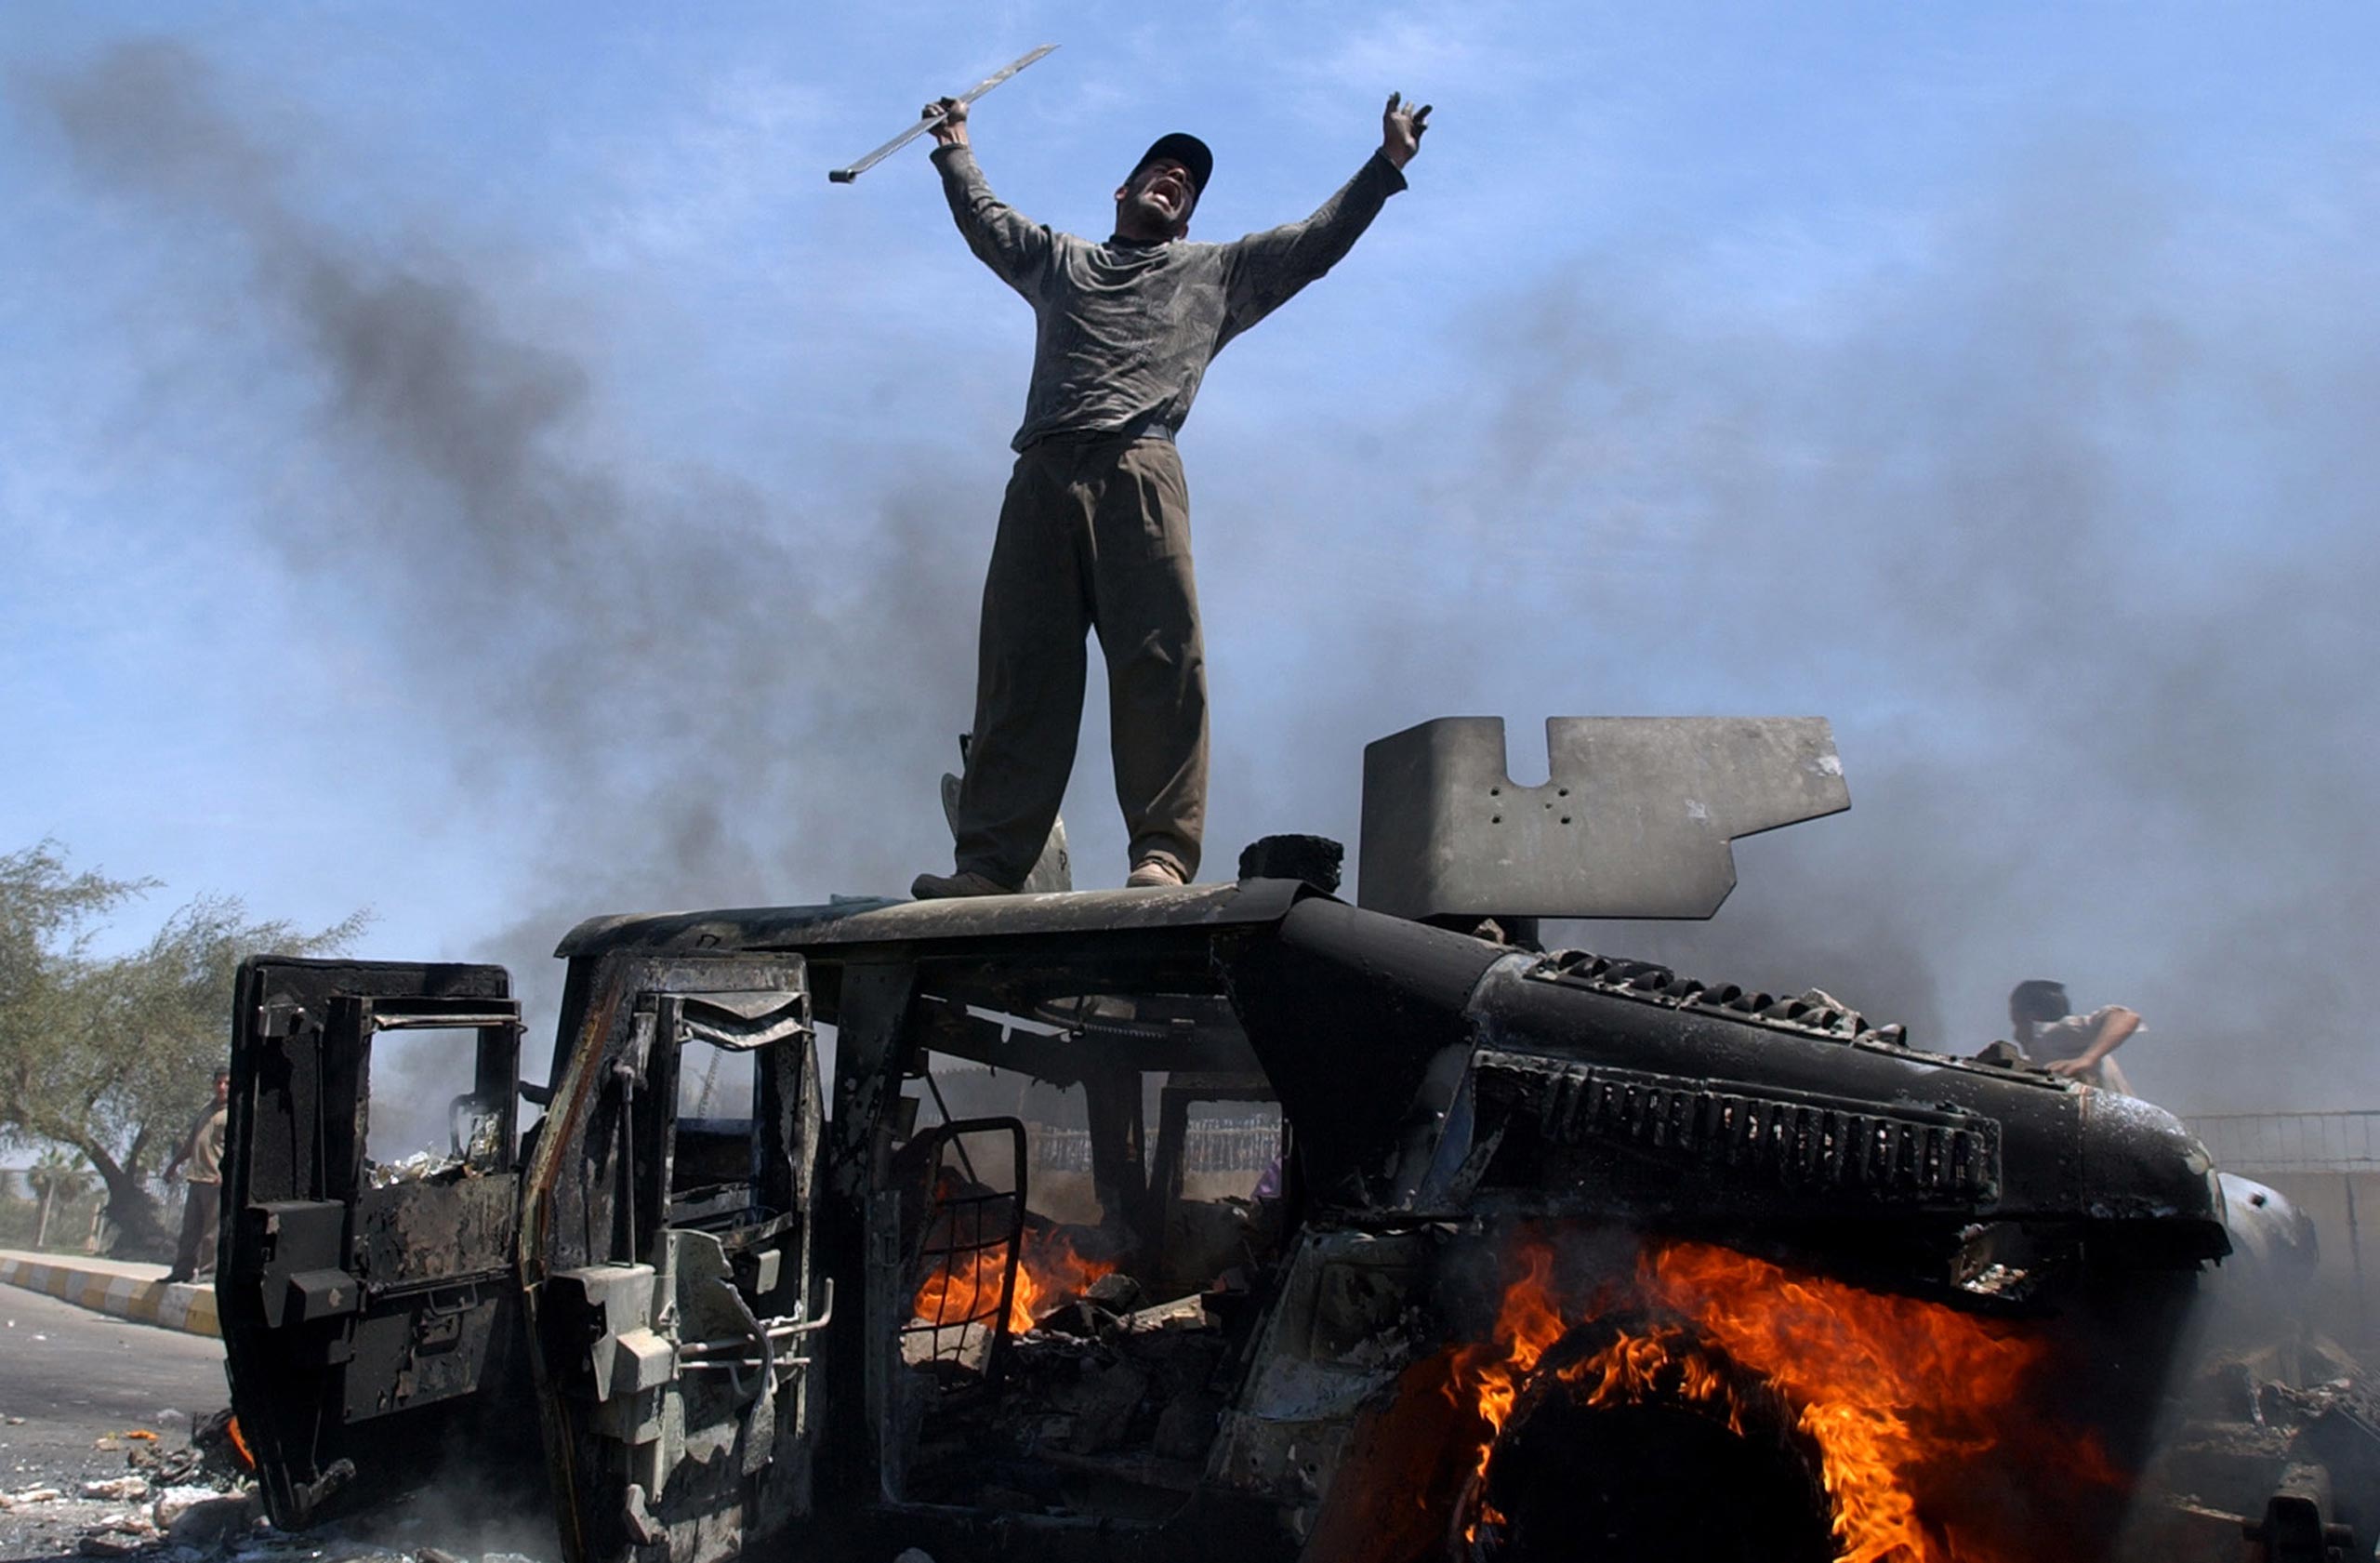 An Iraqi man celebrates atop of a burning U.S. Army Humvee in the northern part of Baghdad on April 26, 2004.